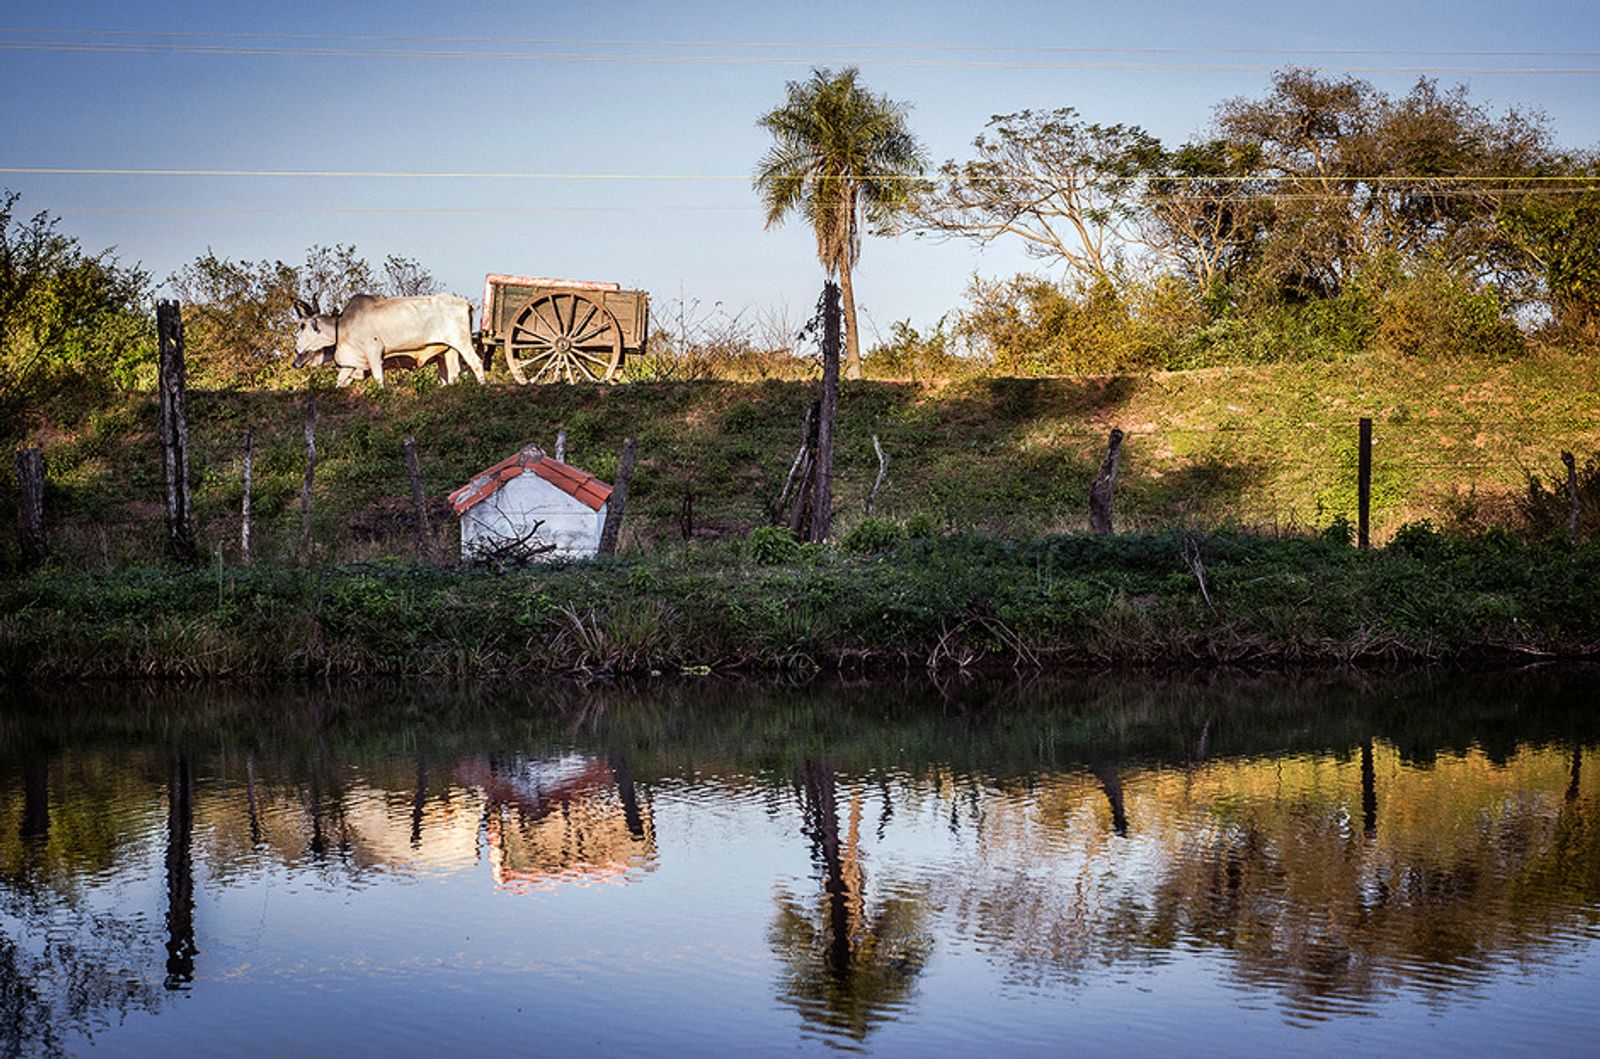 © Marcelo David Sandoval - Reflection of a driverless oxcart as it crosses by the path where Sergio Covis died, when he was 25 years old.